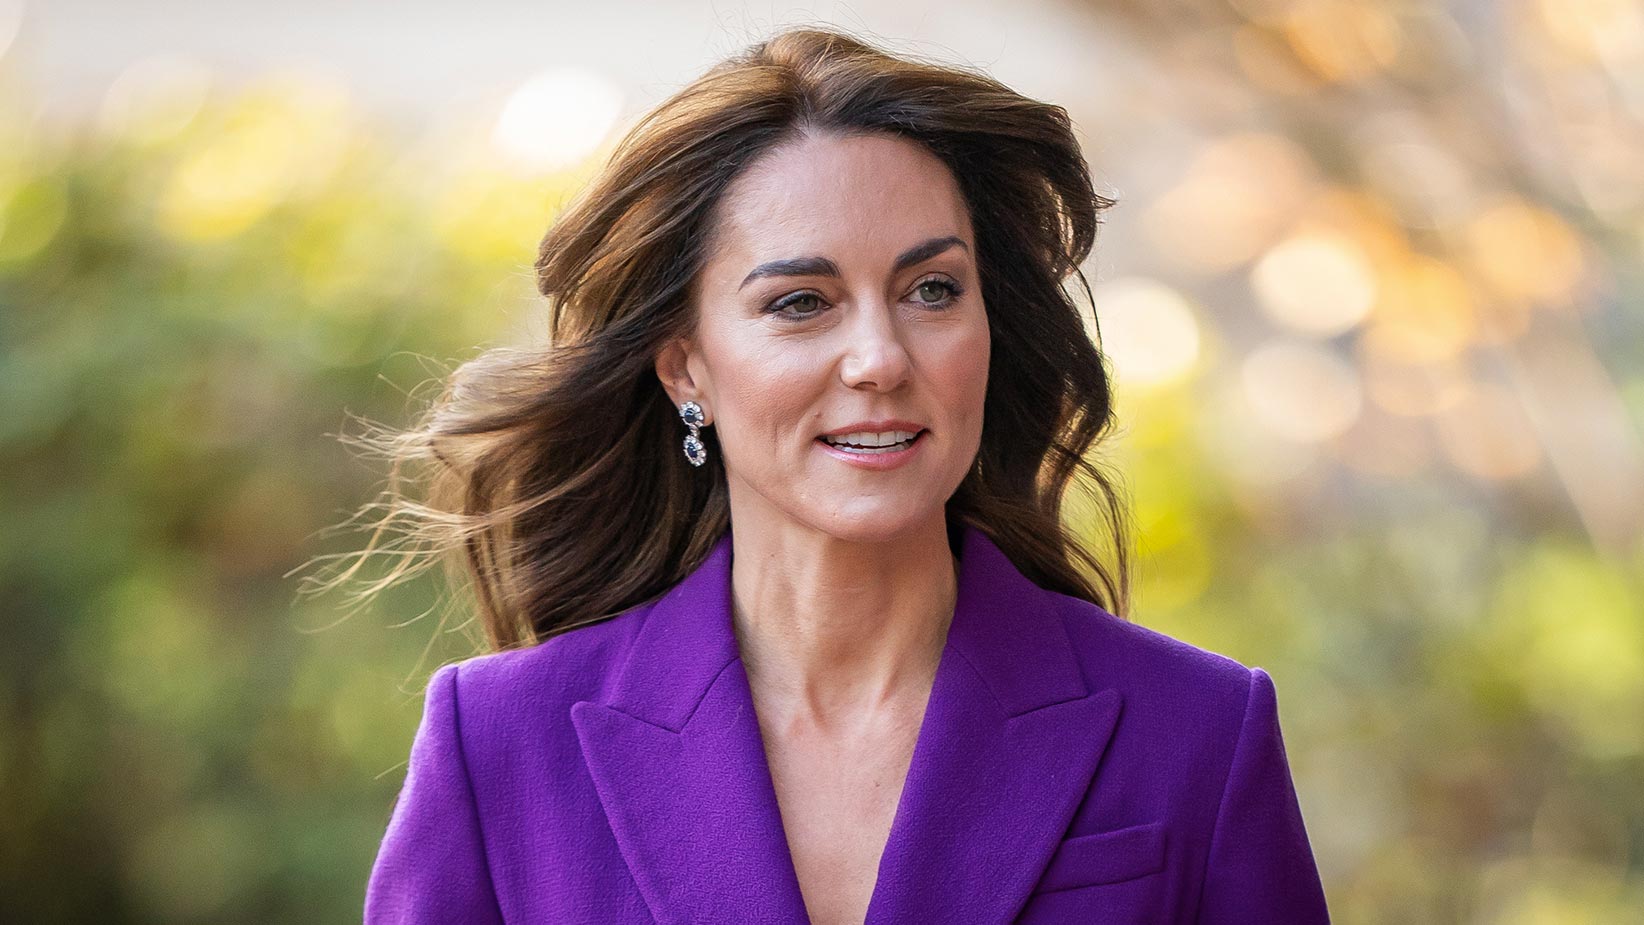 Kate Middleton in hospital after undergoing abdominal surgery | This ...